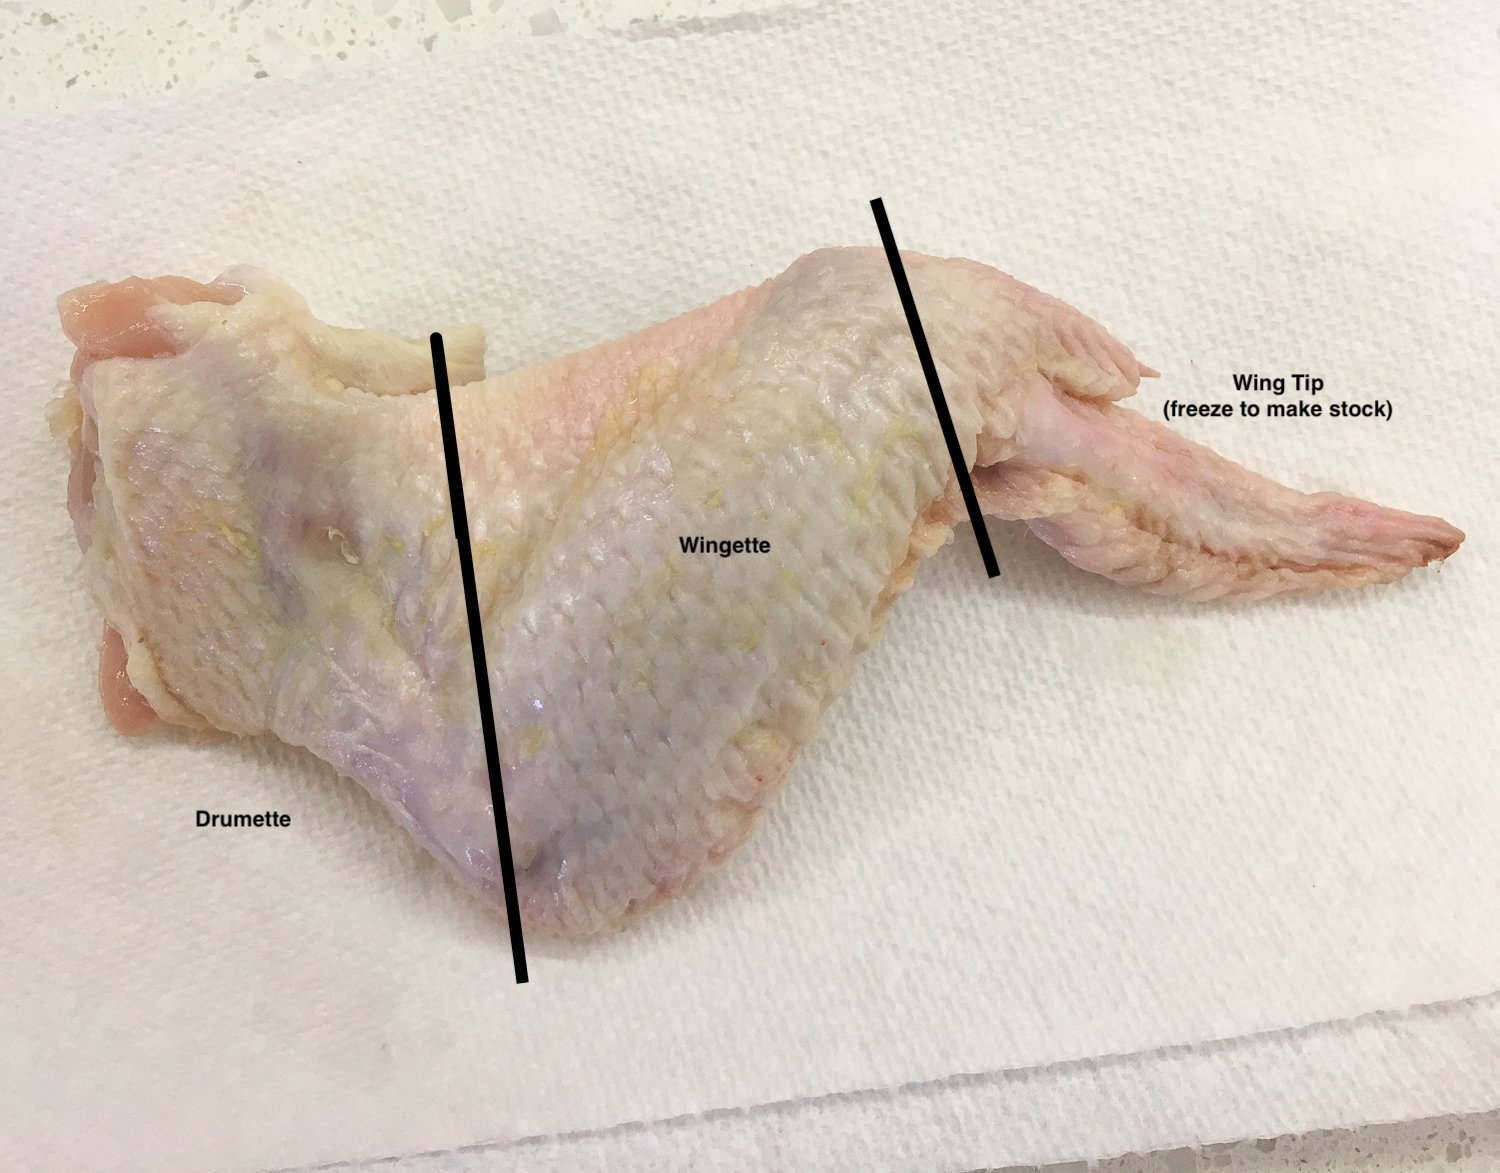 The three sections of a chicken wing.